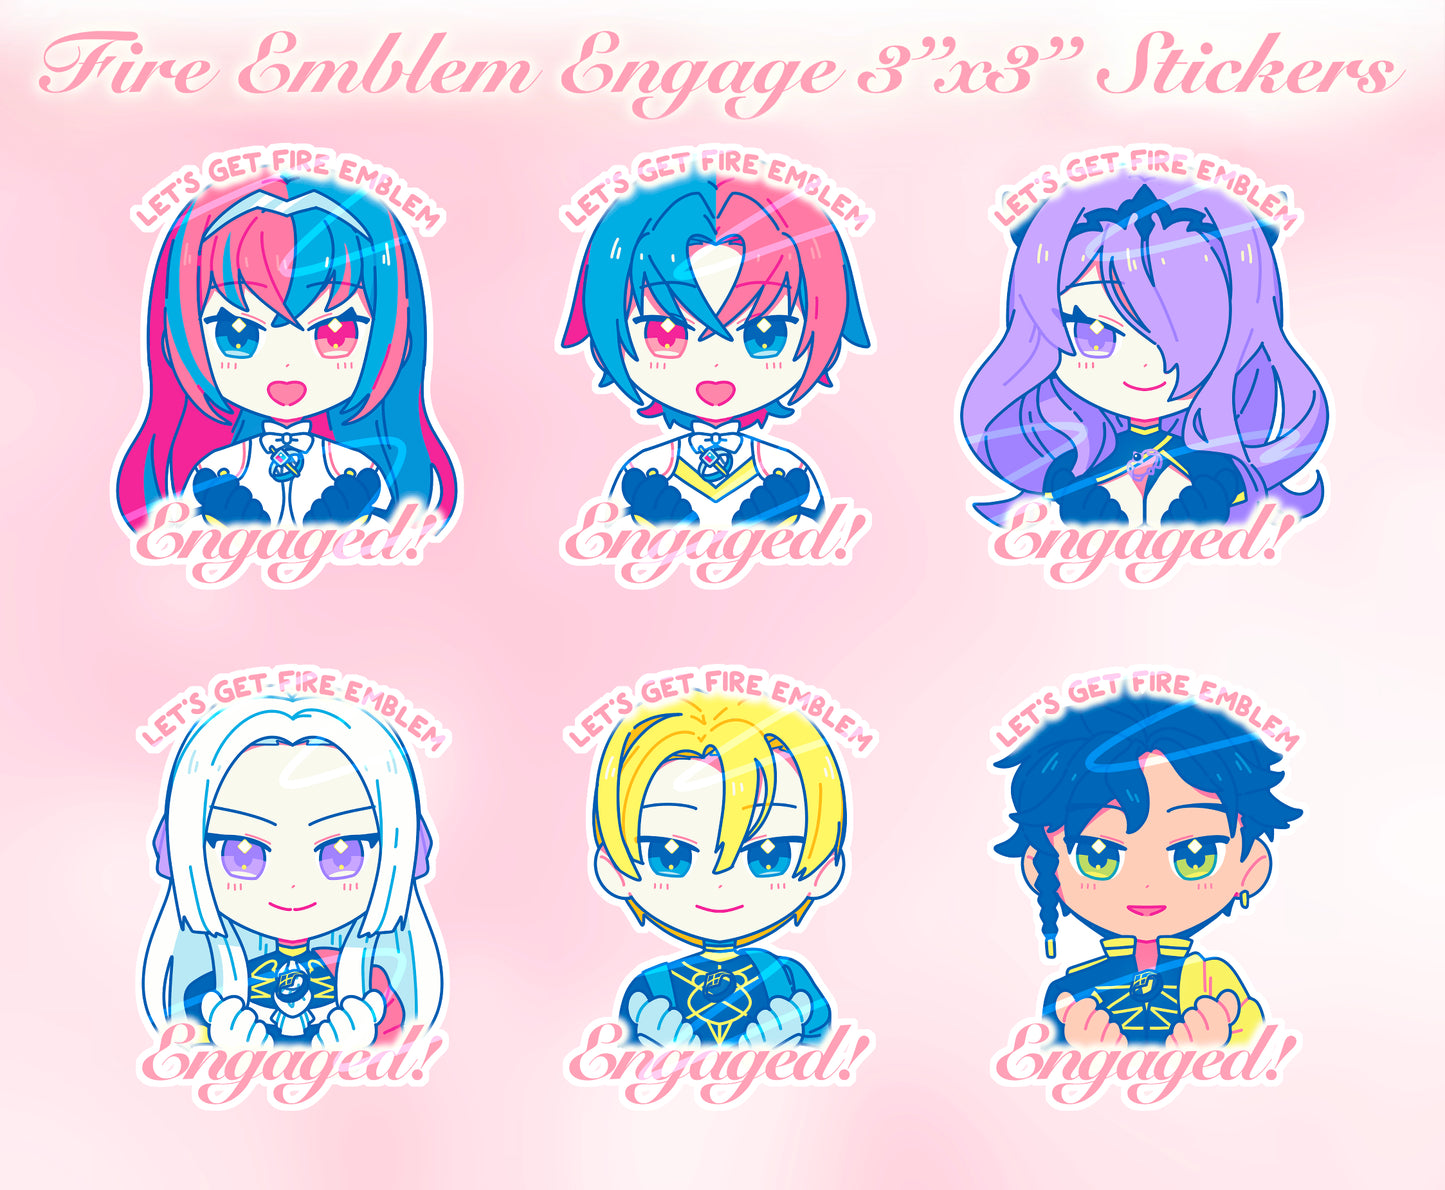 Fire Emblem Engage 3" Stickers